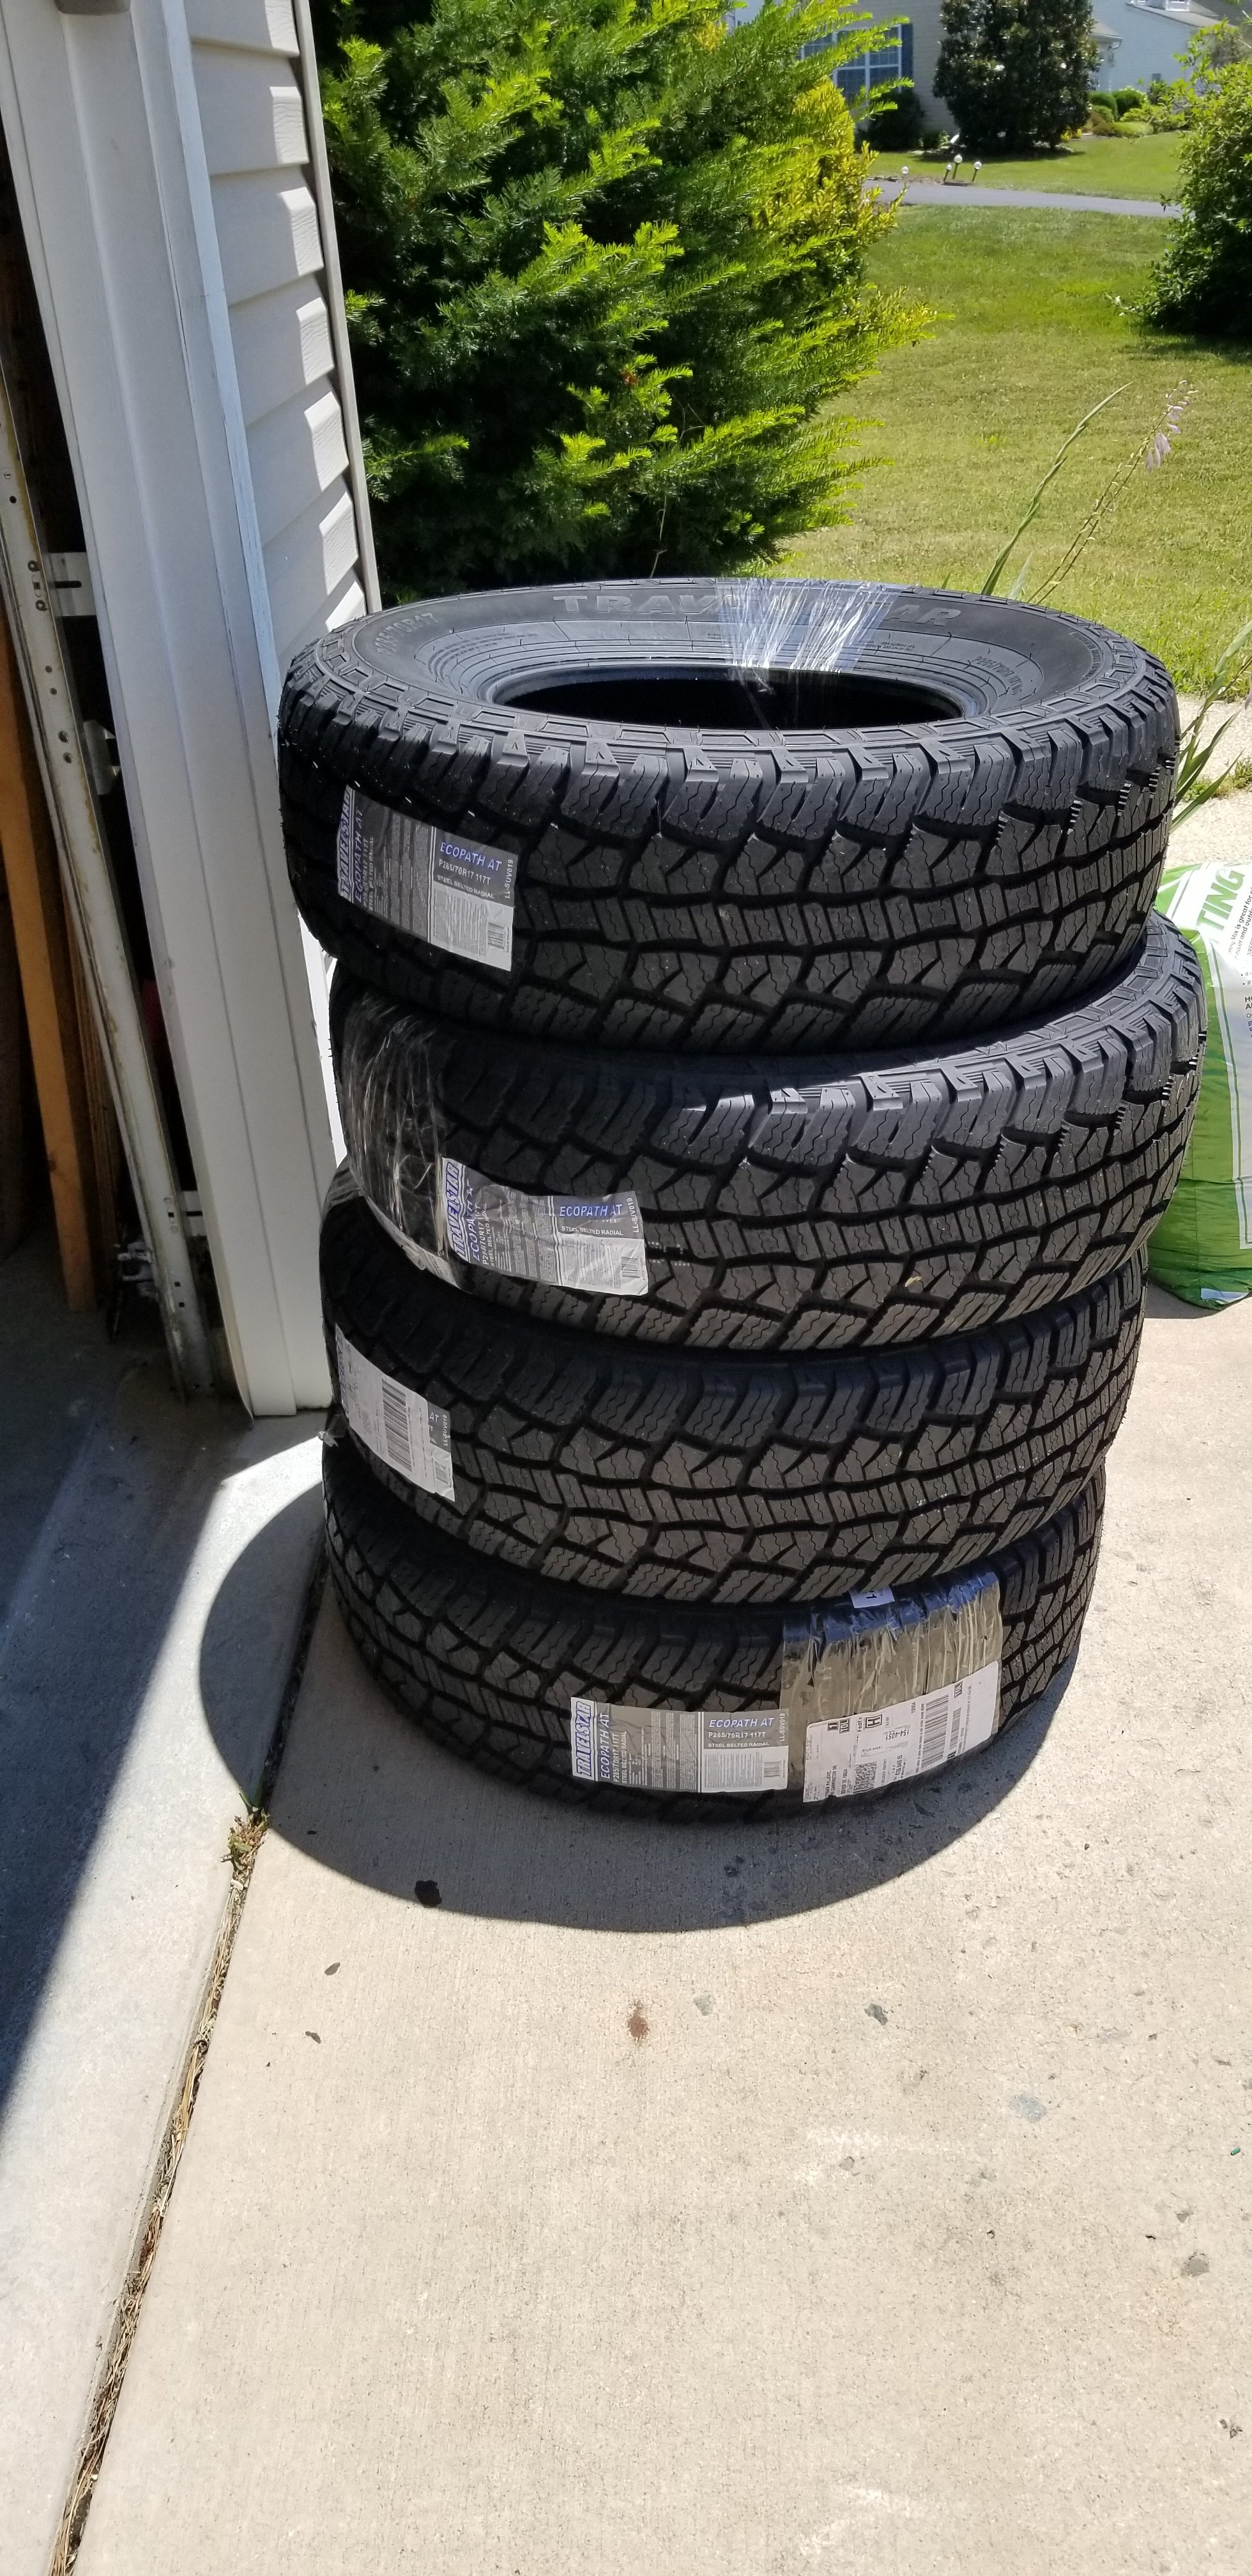 Some daily tires